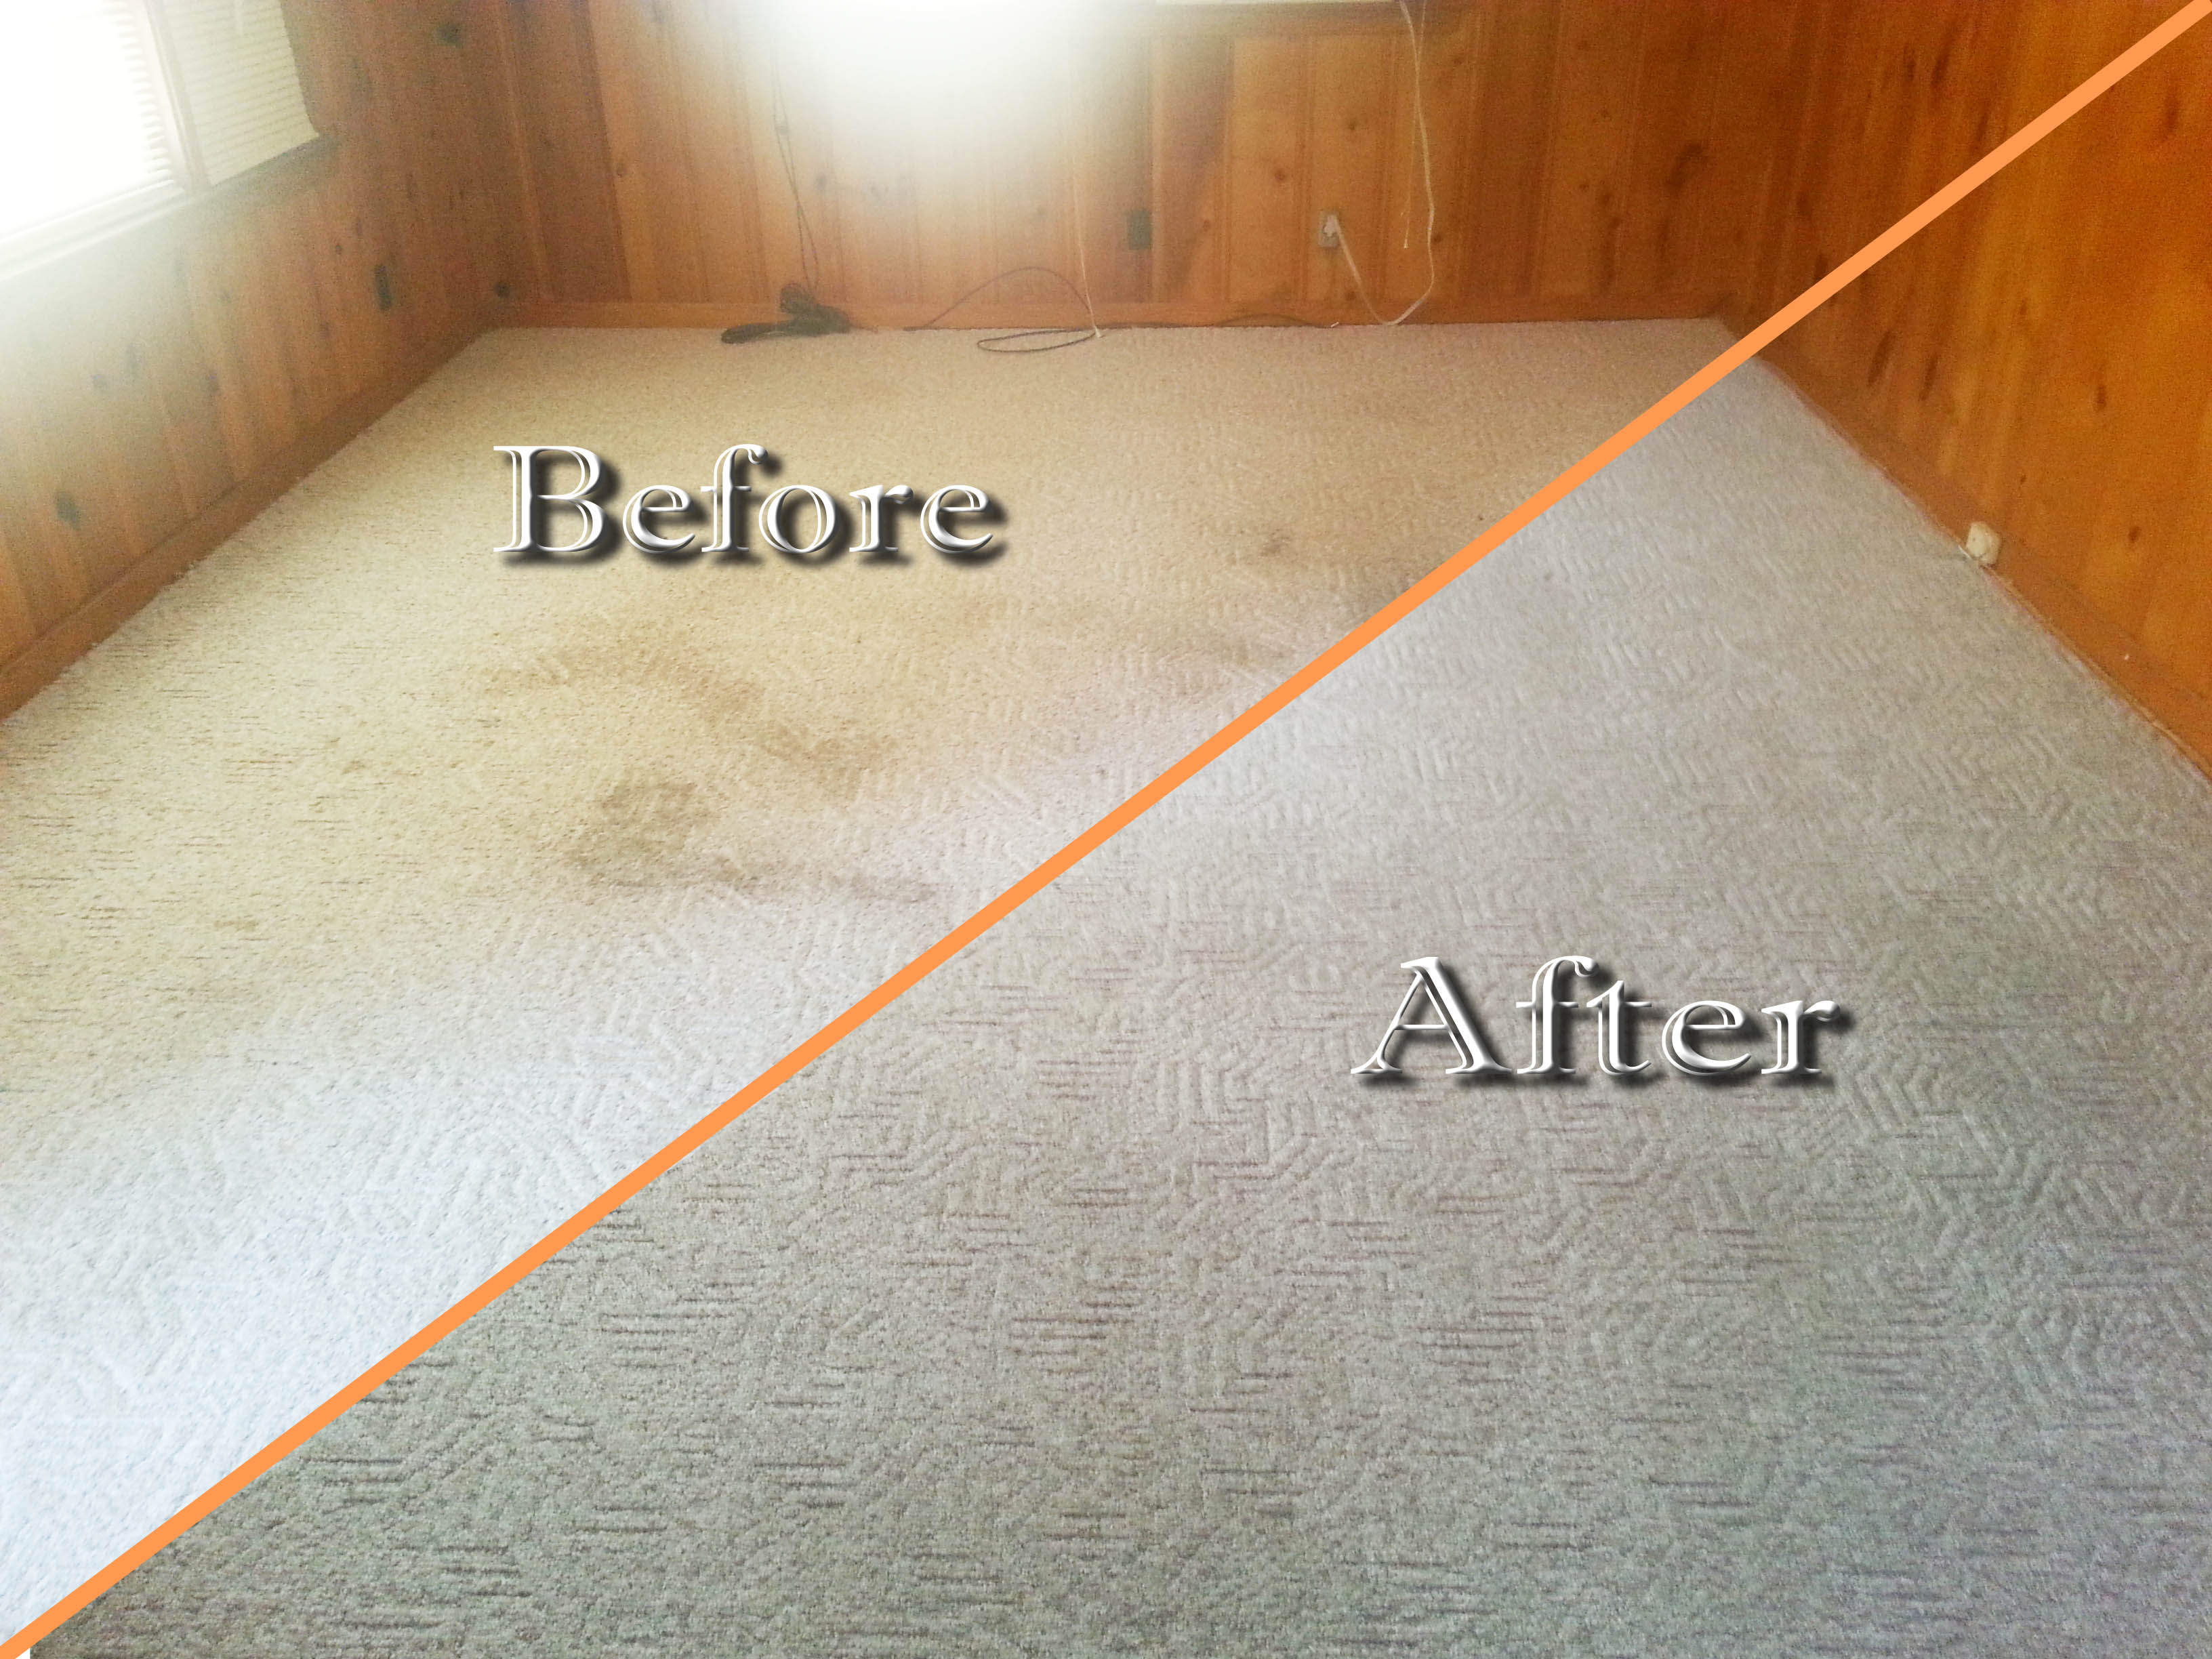 Carpet and Tile Cleaning before and after shots.